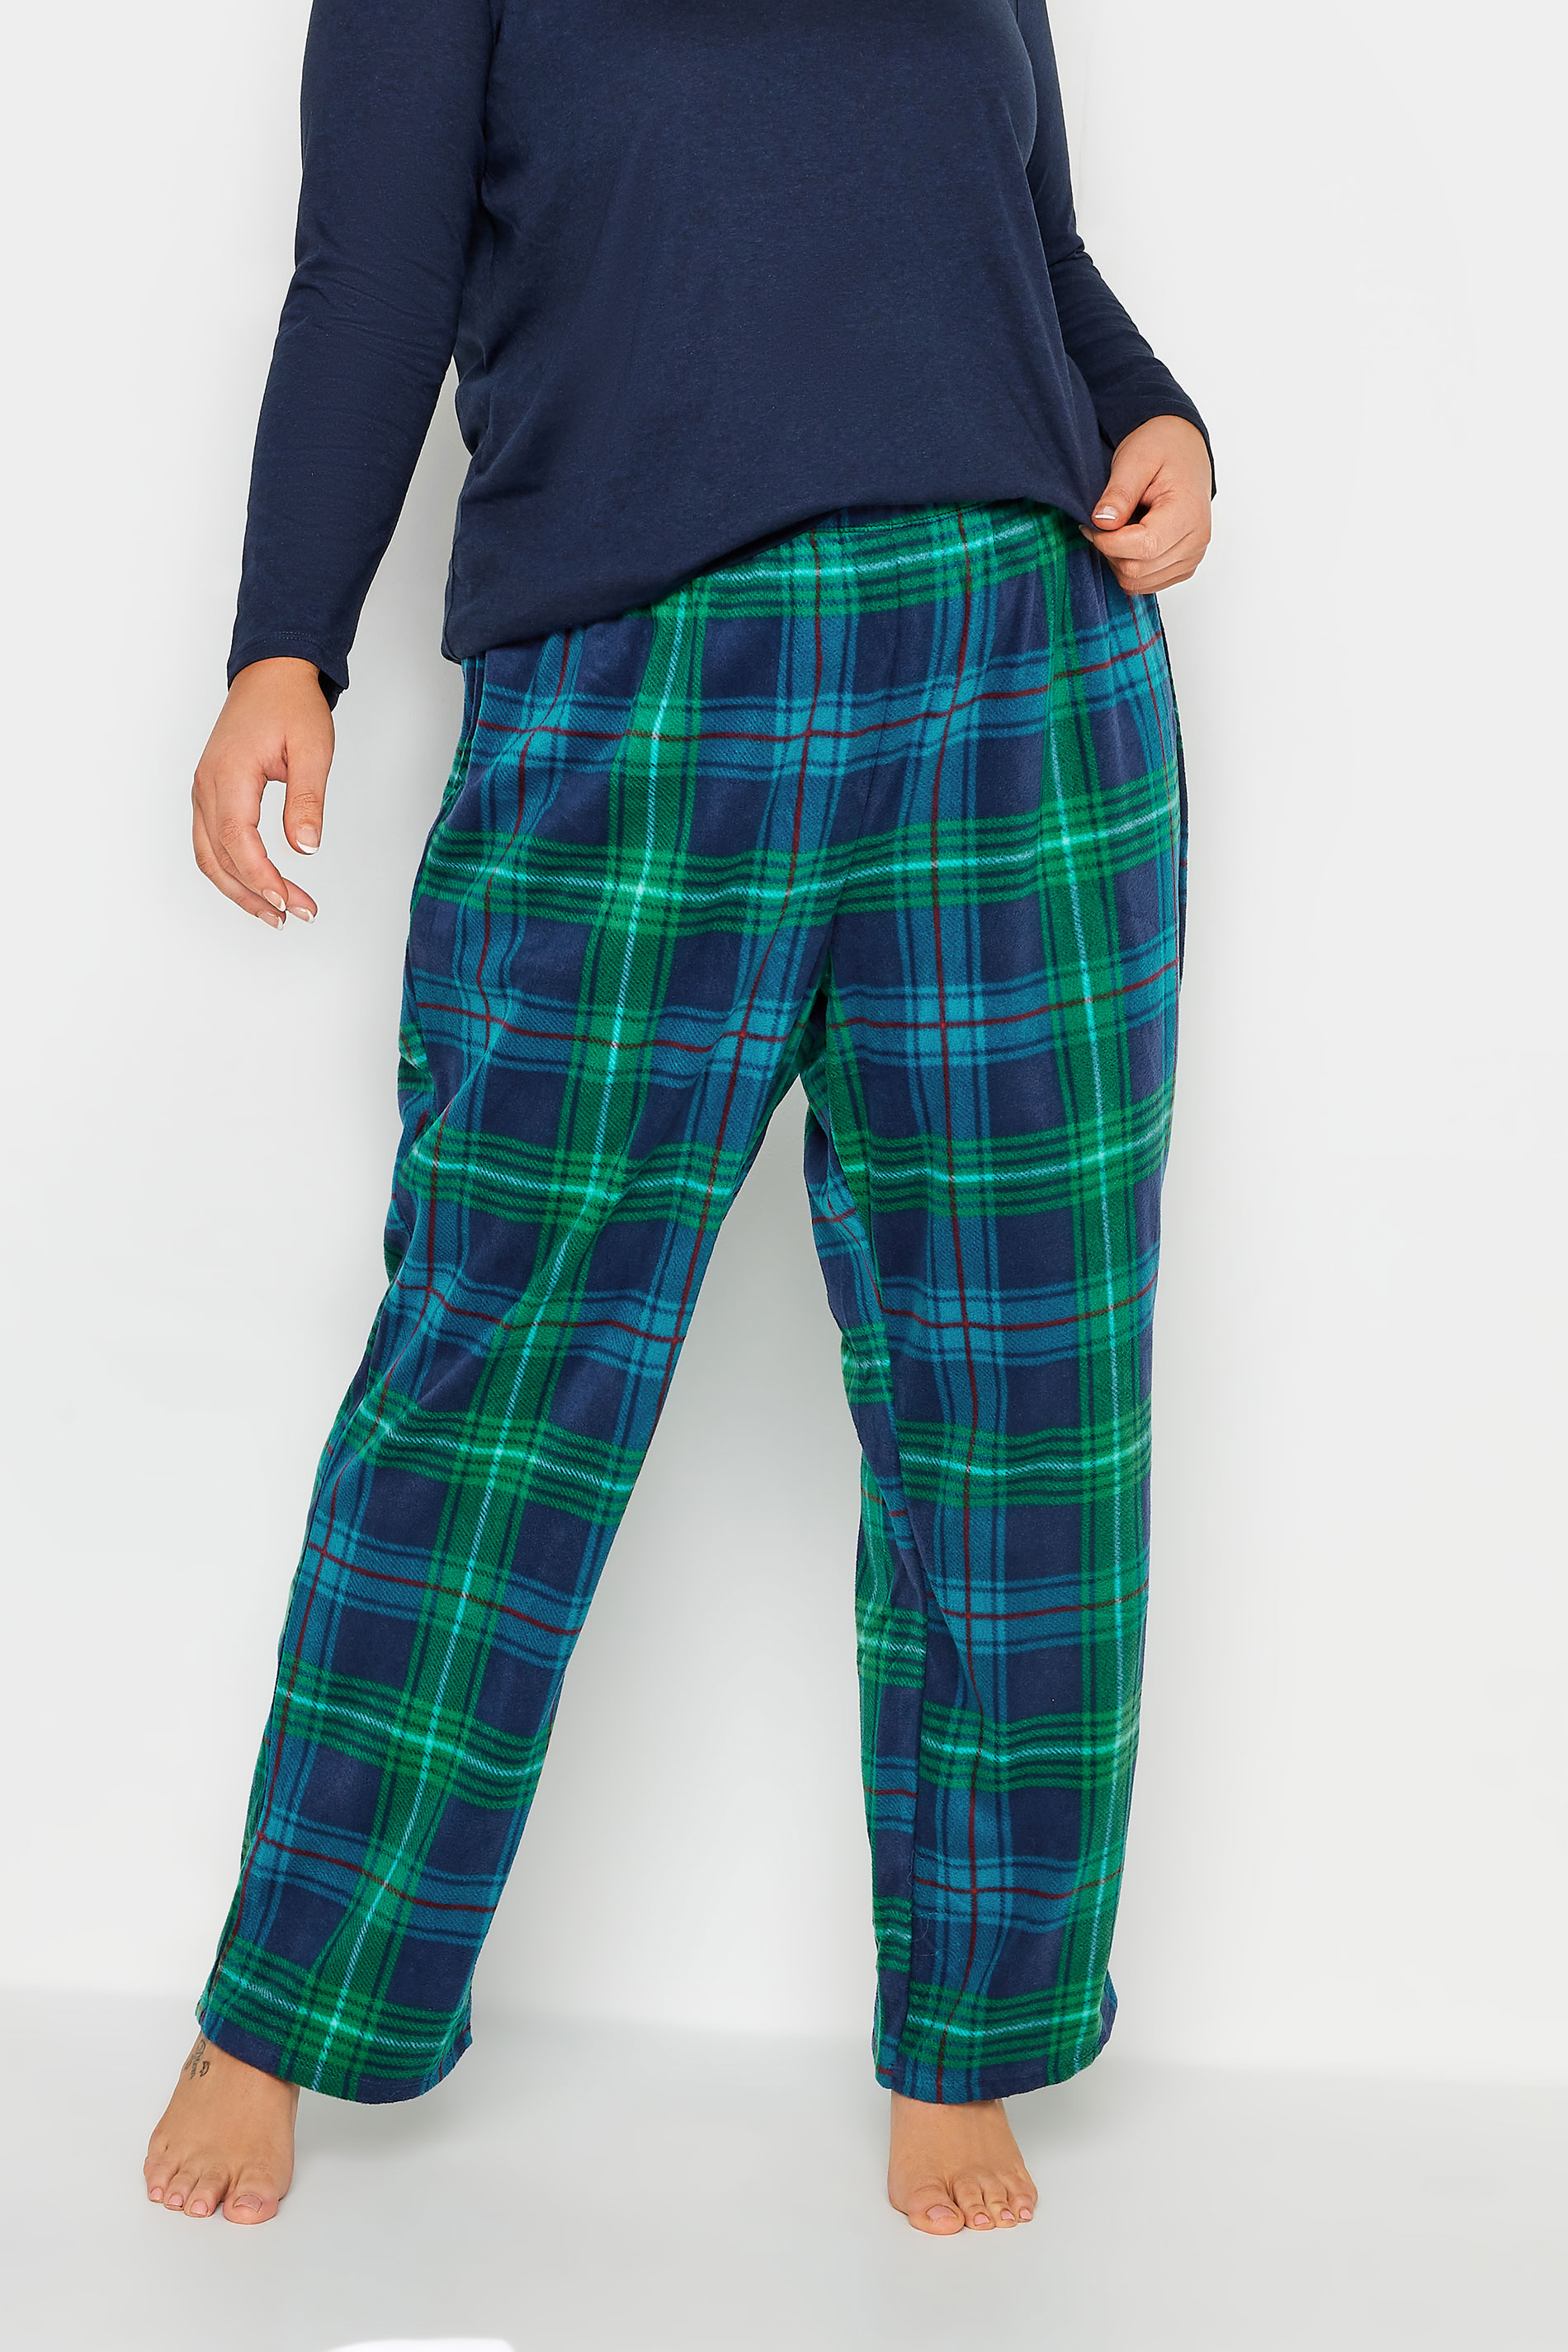 YOURS Curve Plus Size Blue & Green Tartan Print Pyjama Bottoms | Yours Clothing  2